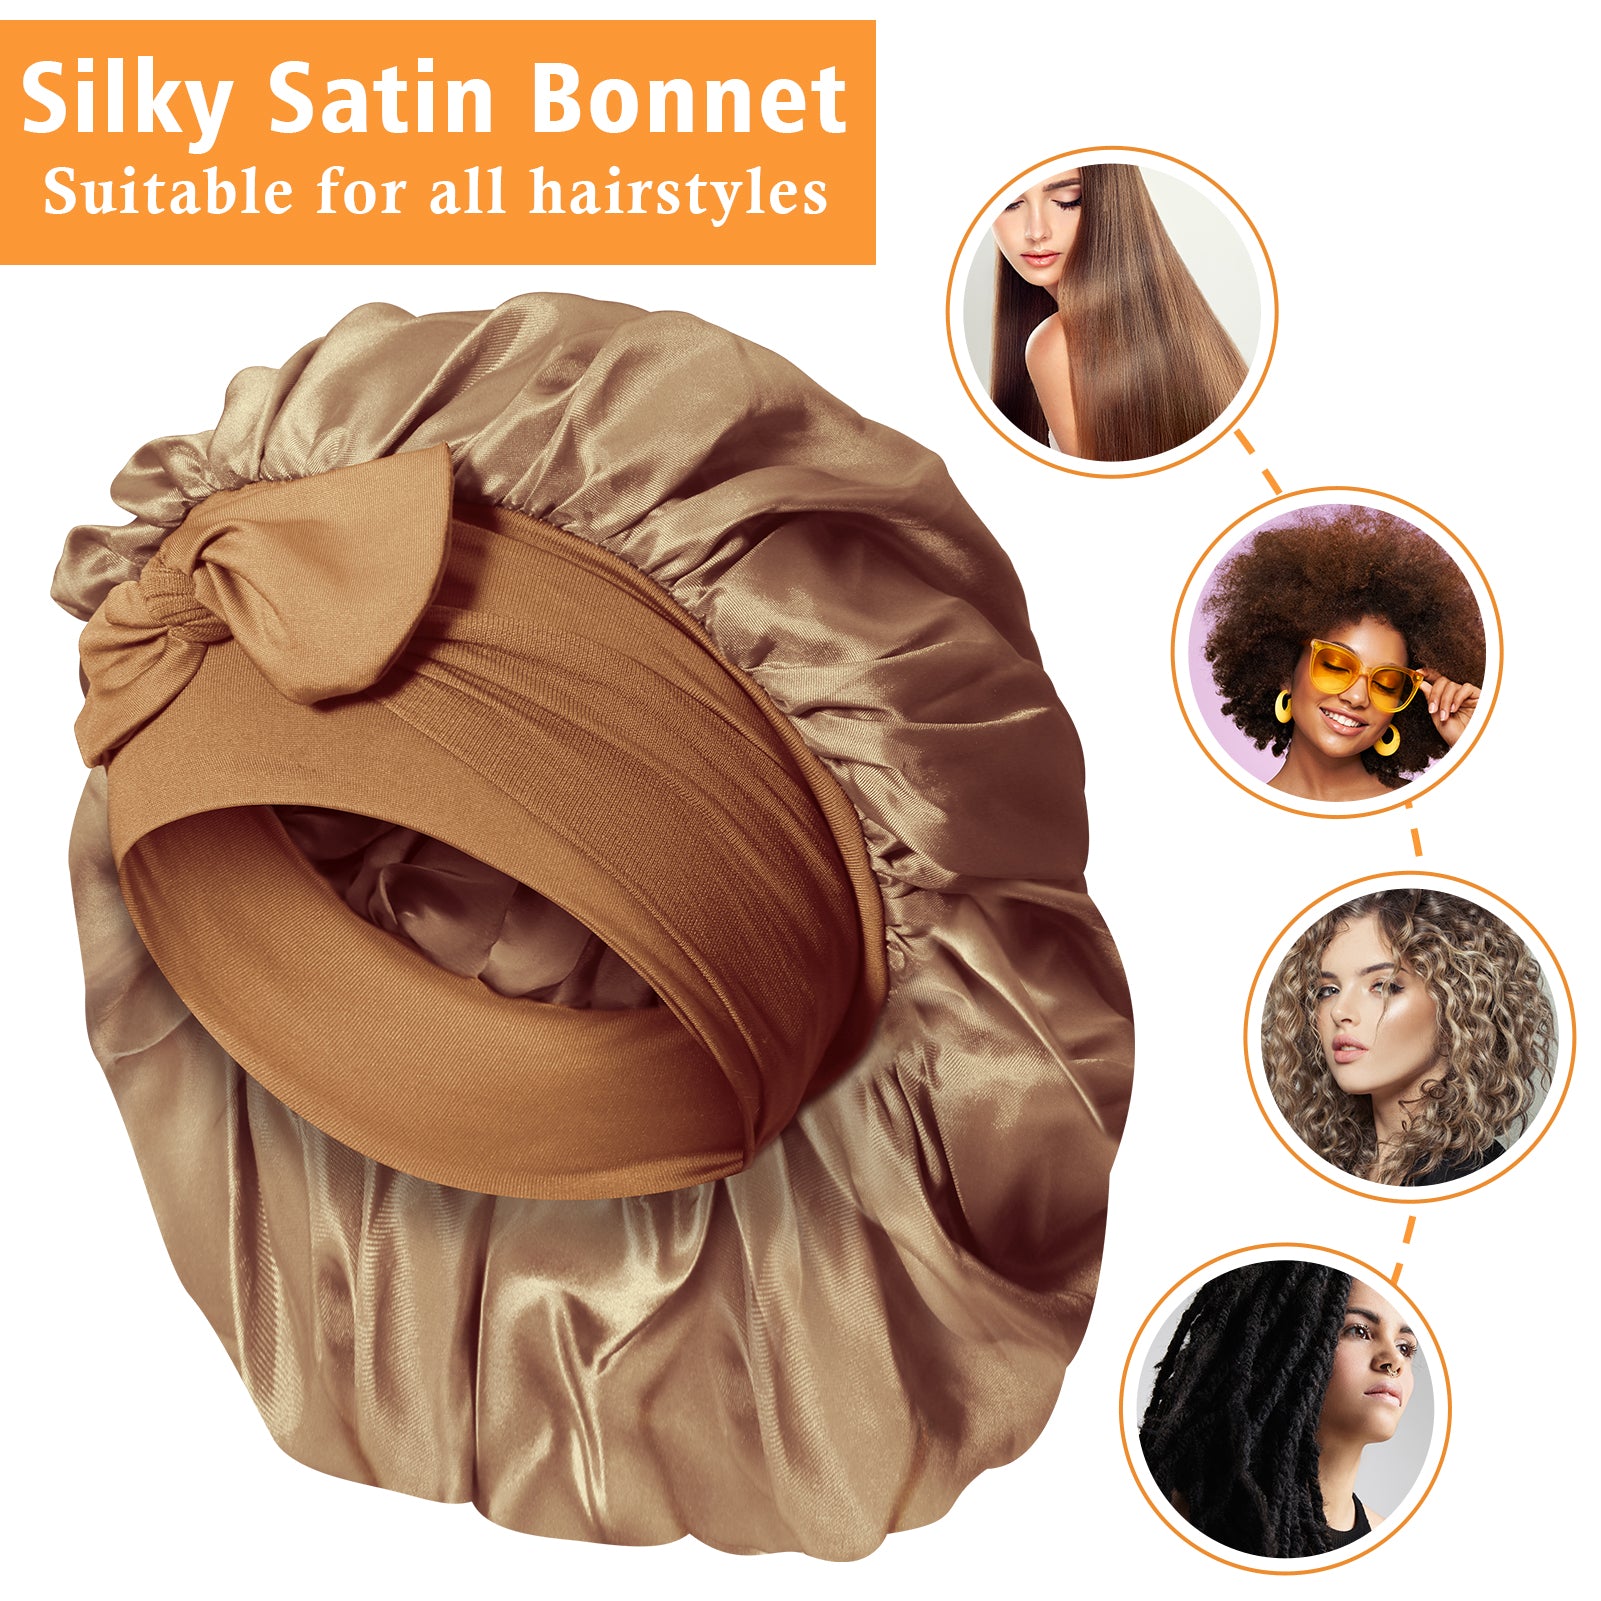 Silky Satin Nightly Hair Bonnet to Help Reduce Breakage, Tangles